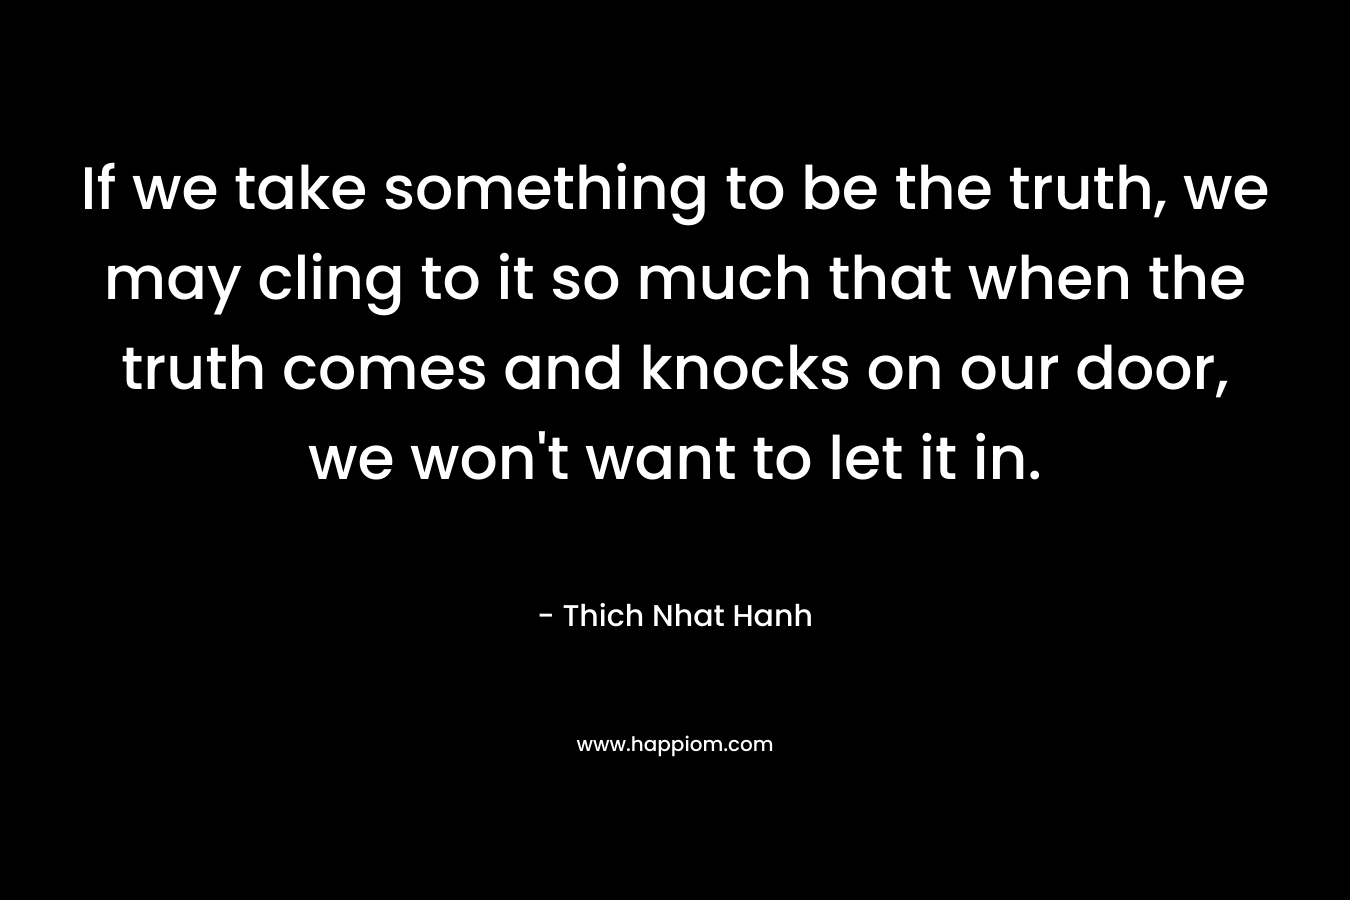 If we take something to be the truth, we may cling to it so much that when the truth comes and knocks on our door, we won't want to let it in.